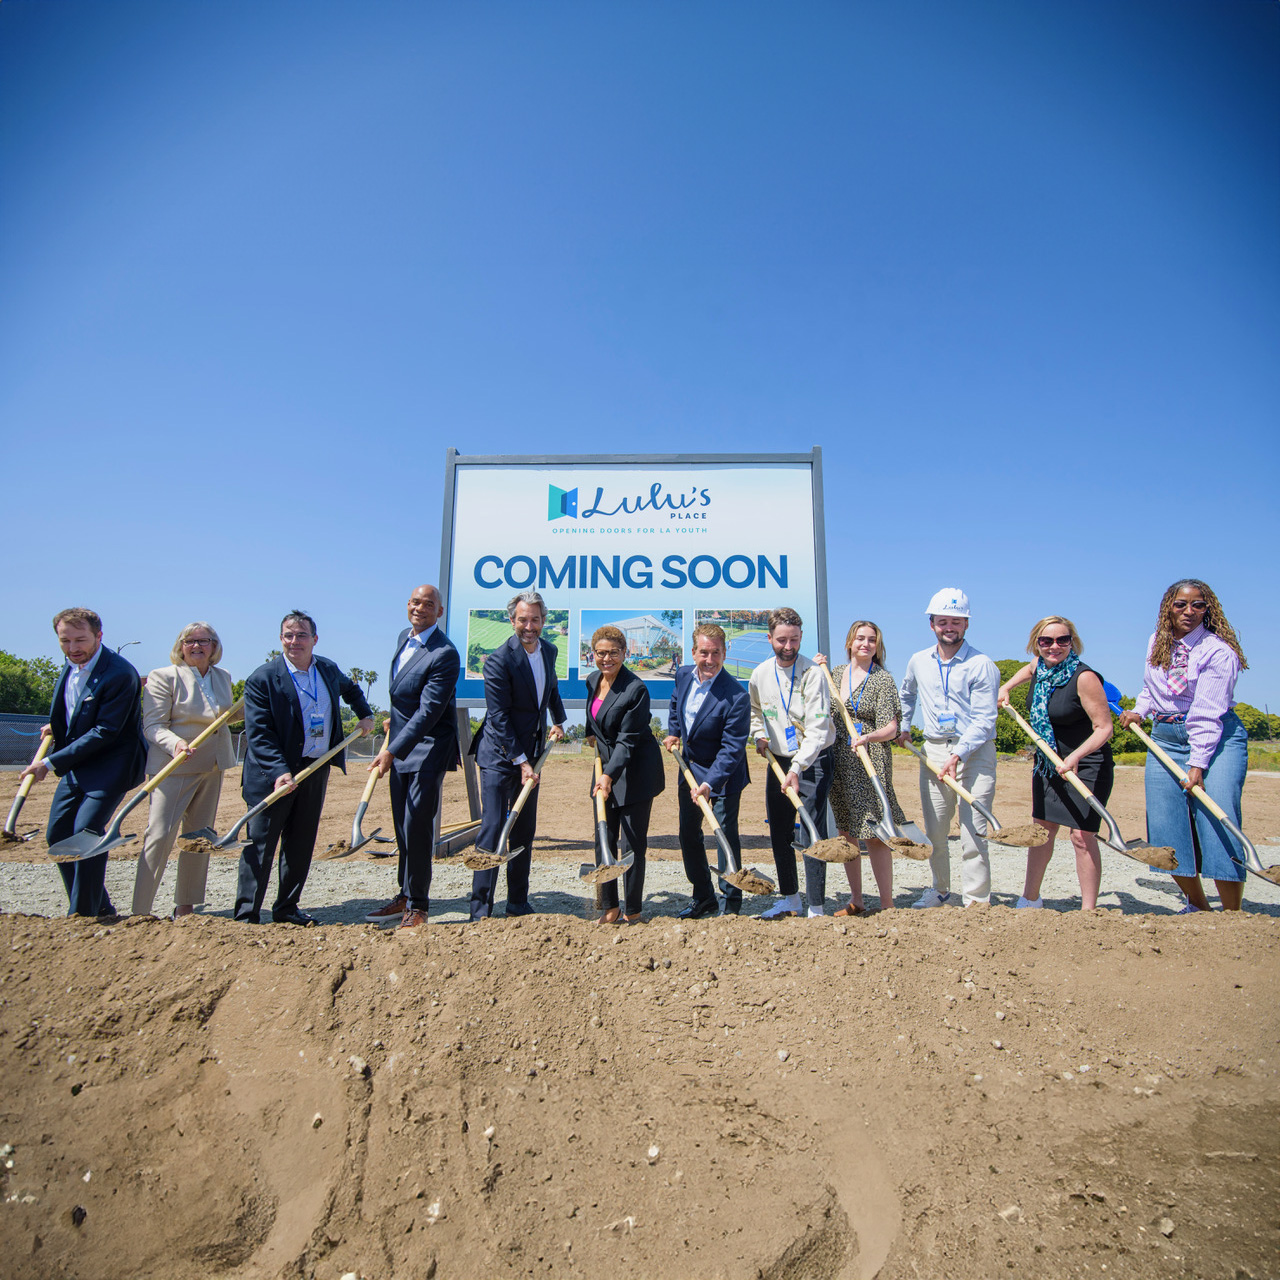 Ceremonial groundbreaking with all the speakers from the event at Lulu's Place in Los Angeles